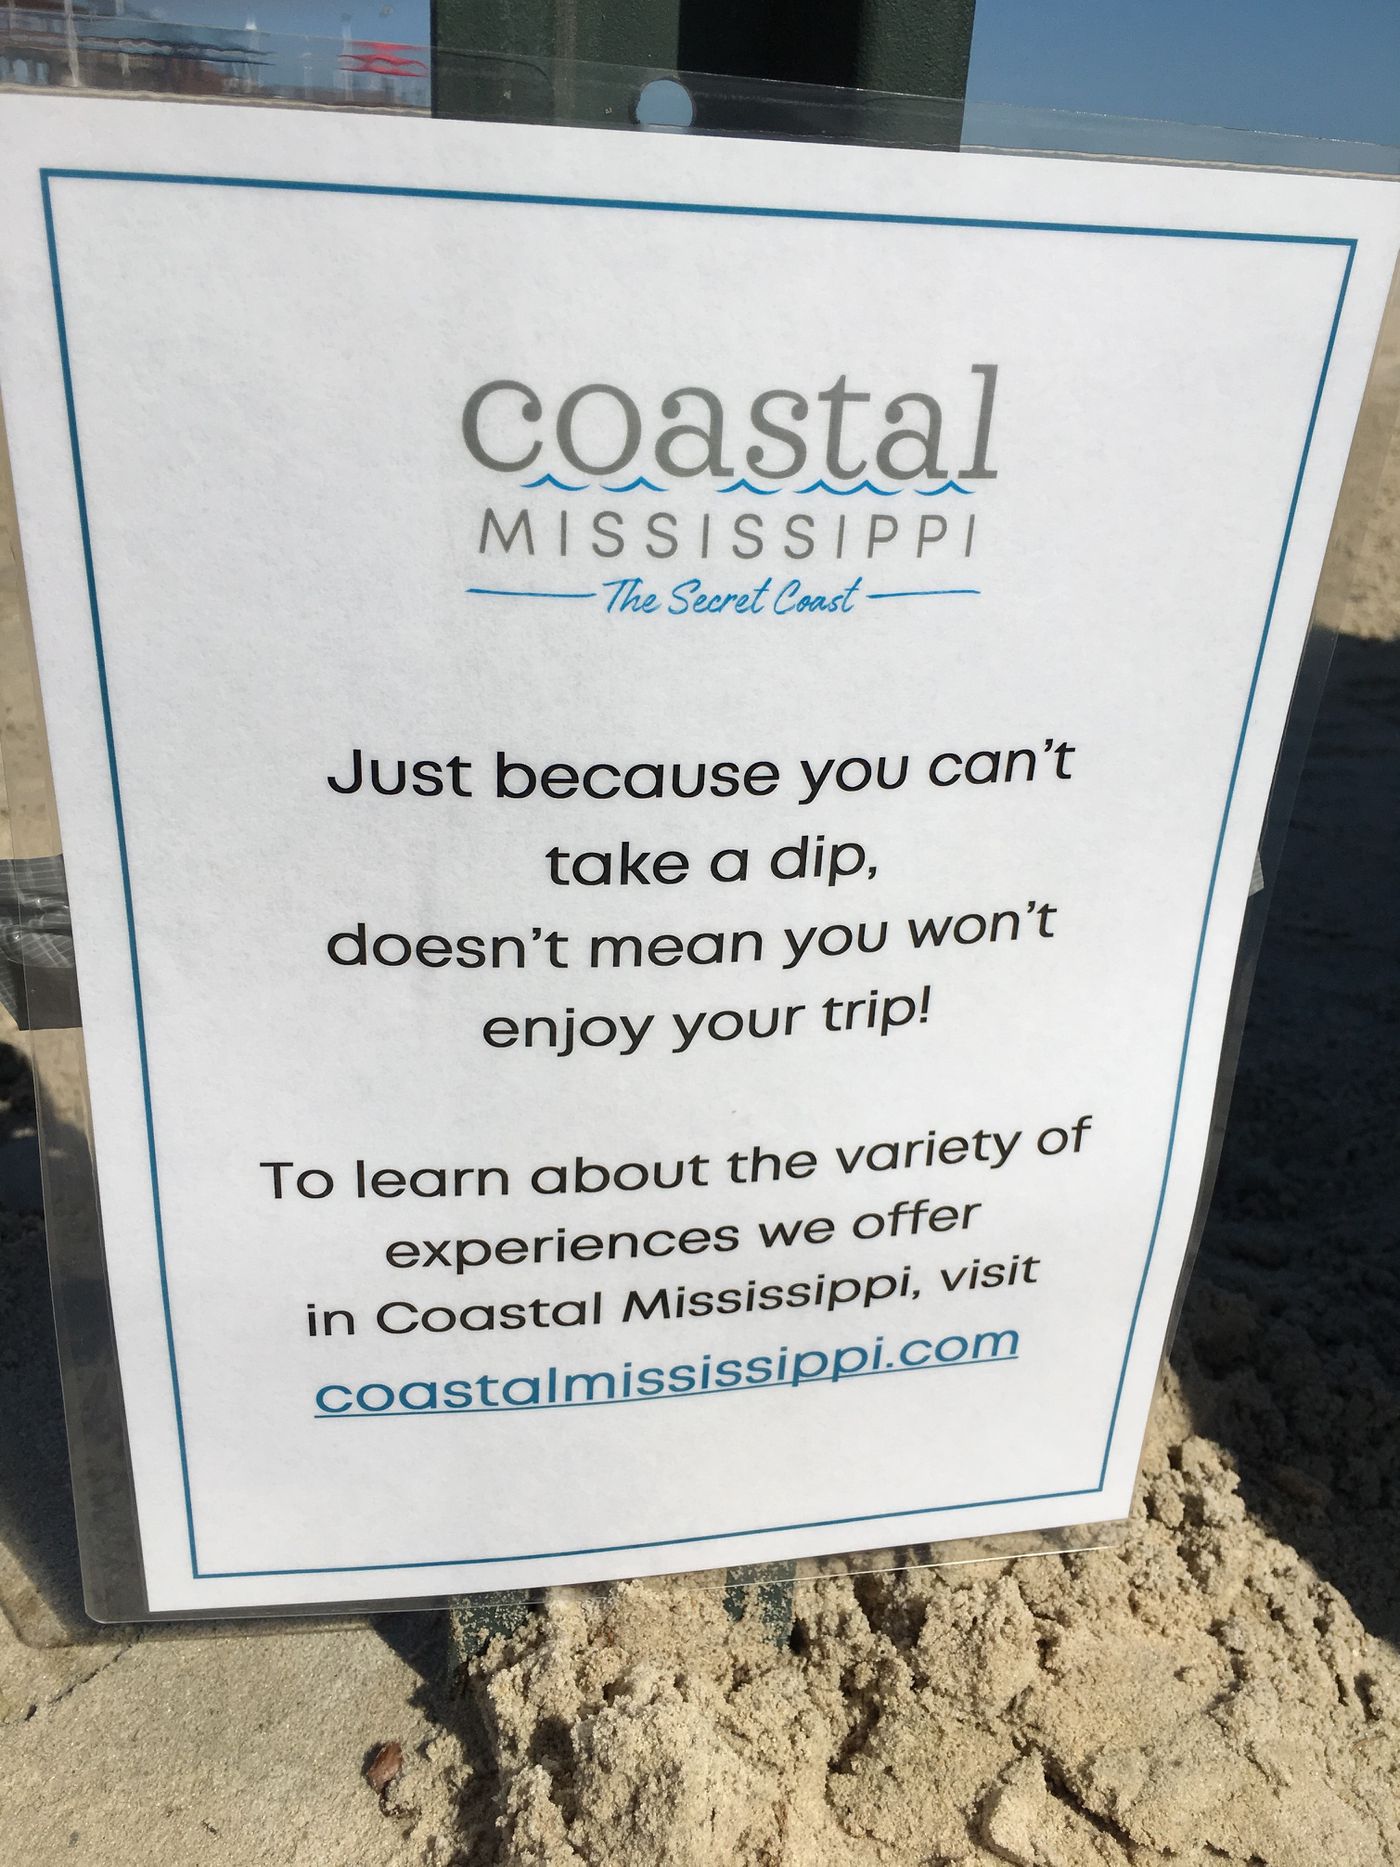 Coastal Mississippi hopes Fourth of July visitors to the Mississippi Gulf Coast won't be discouraged by the water warnings.